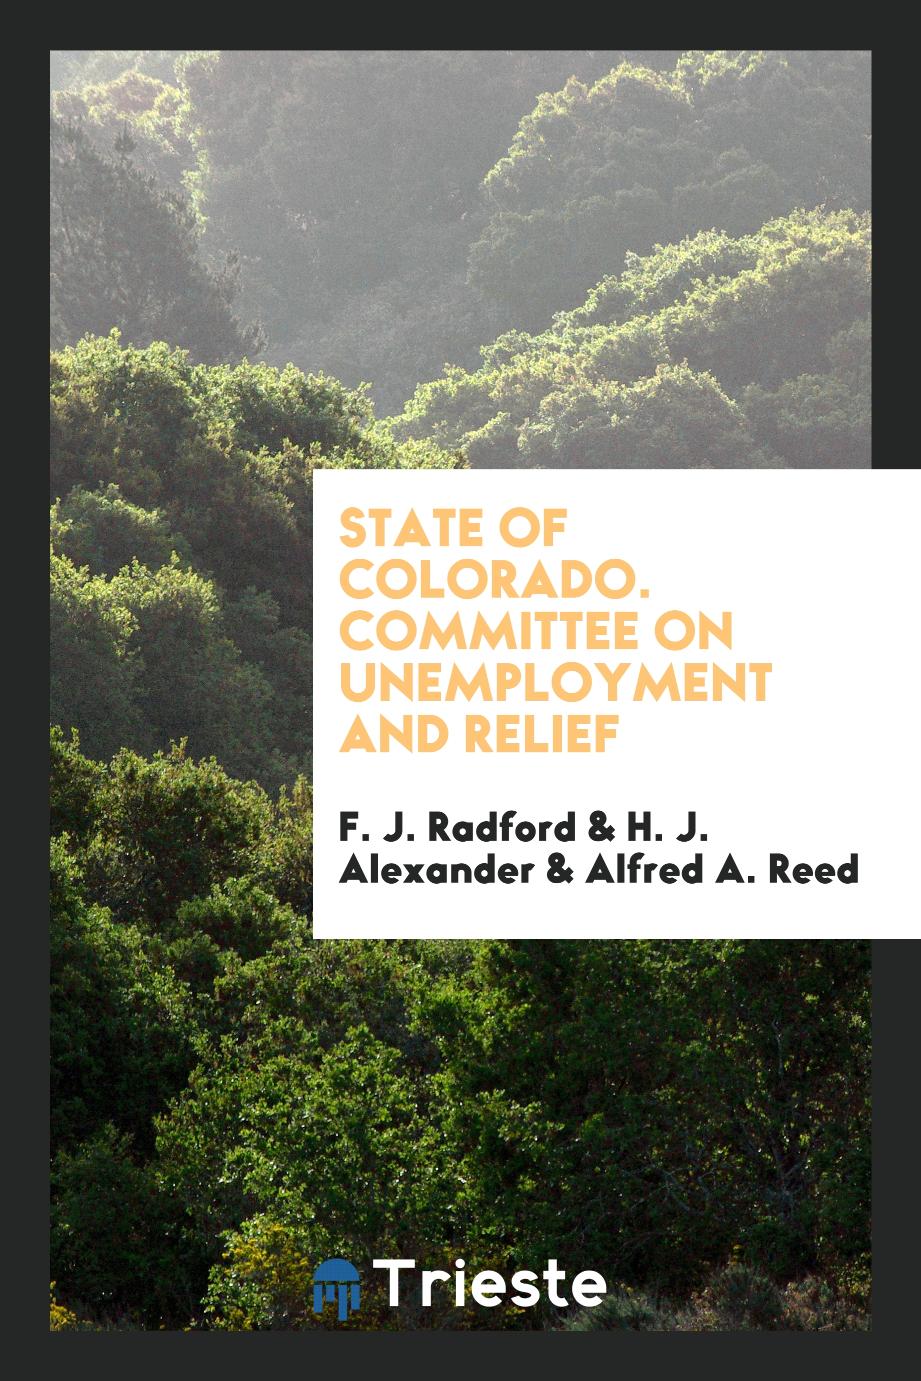 State of Colorado. Committee on unemployment and relief